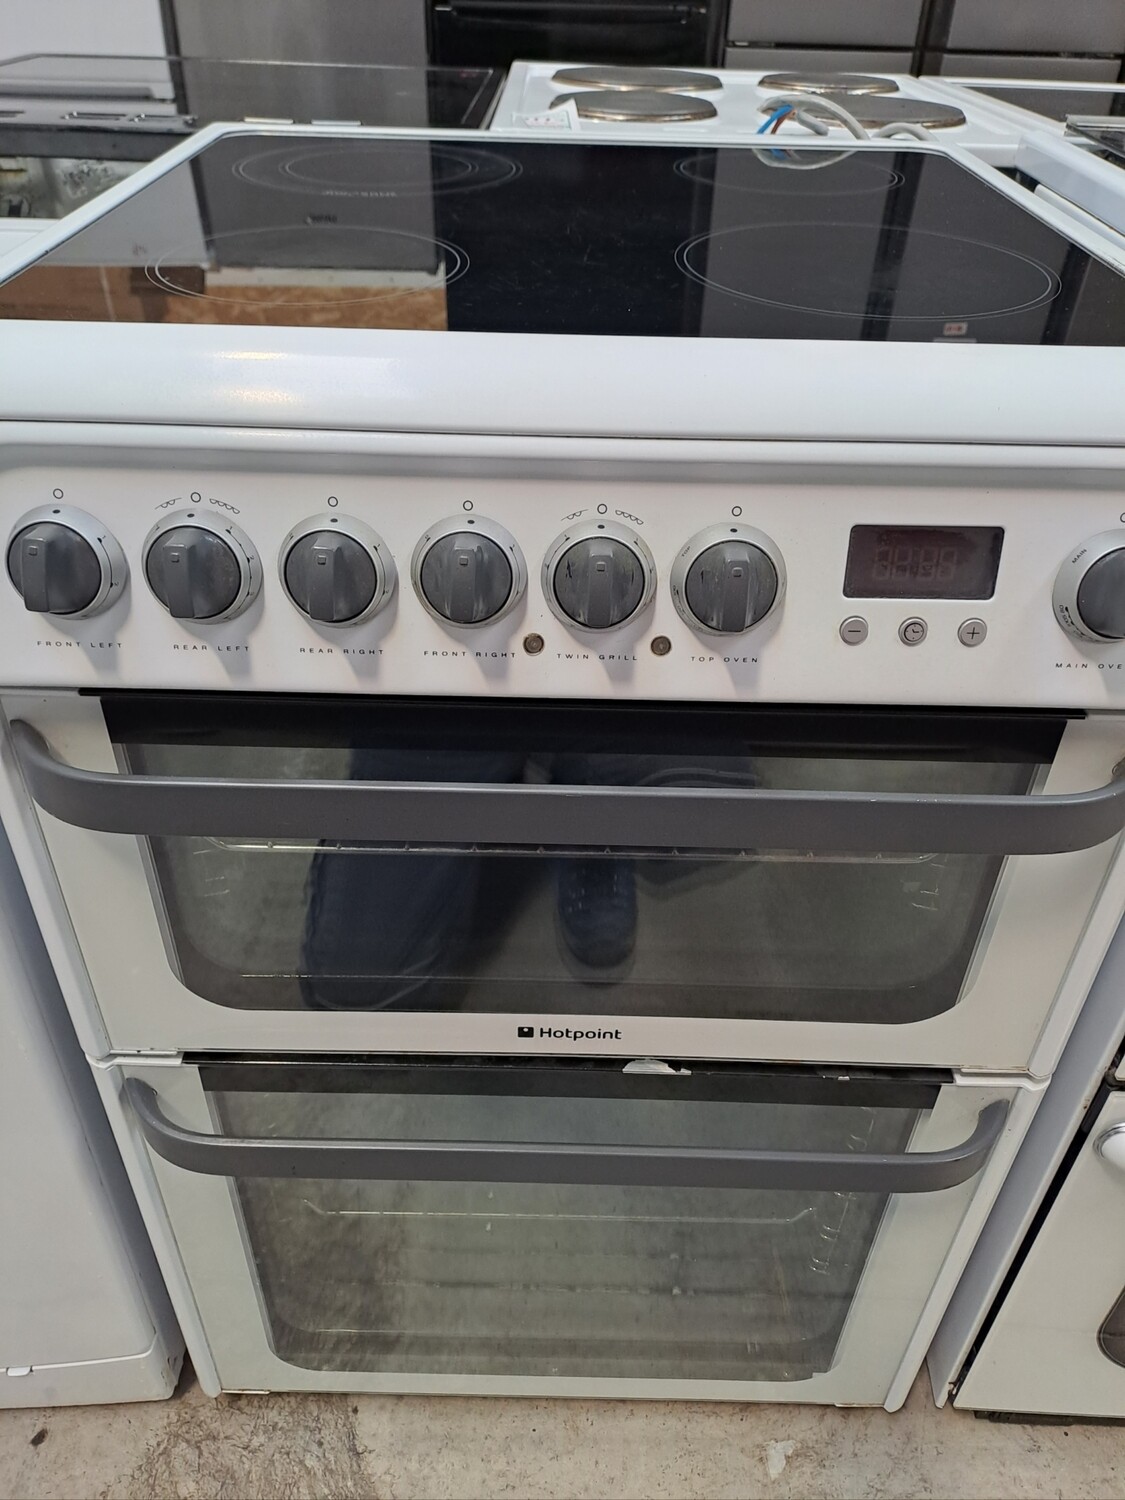 Hotpoint JLE61P 60cm Electric cooker Twin Cavity Double Oven Ceramic Hob - White - Refurbished + 6 month guarantee. This item is located in our Whitby Road Shop 